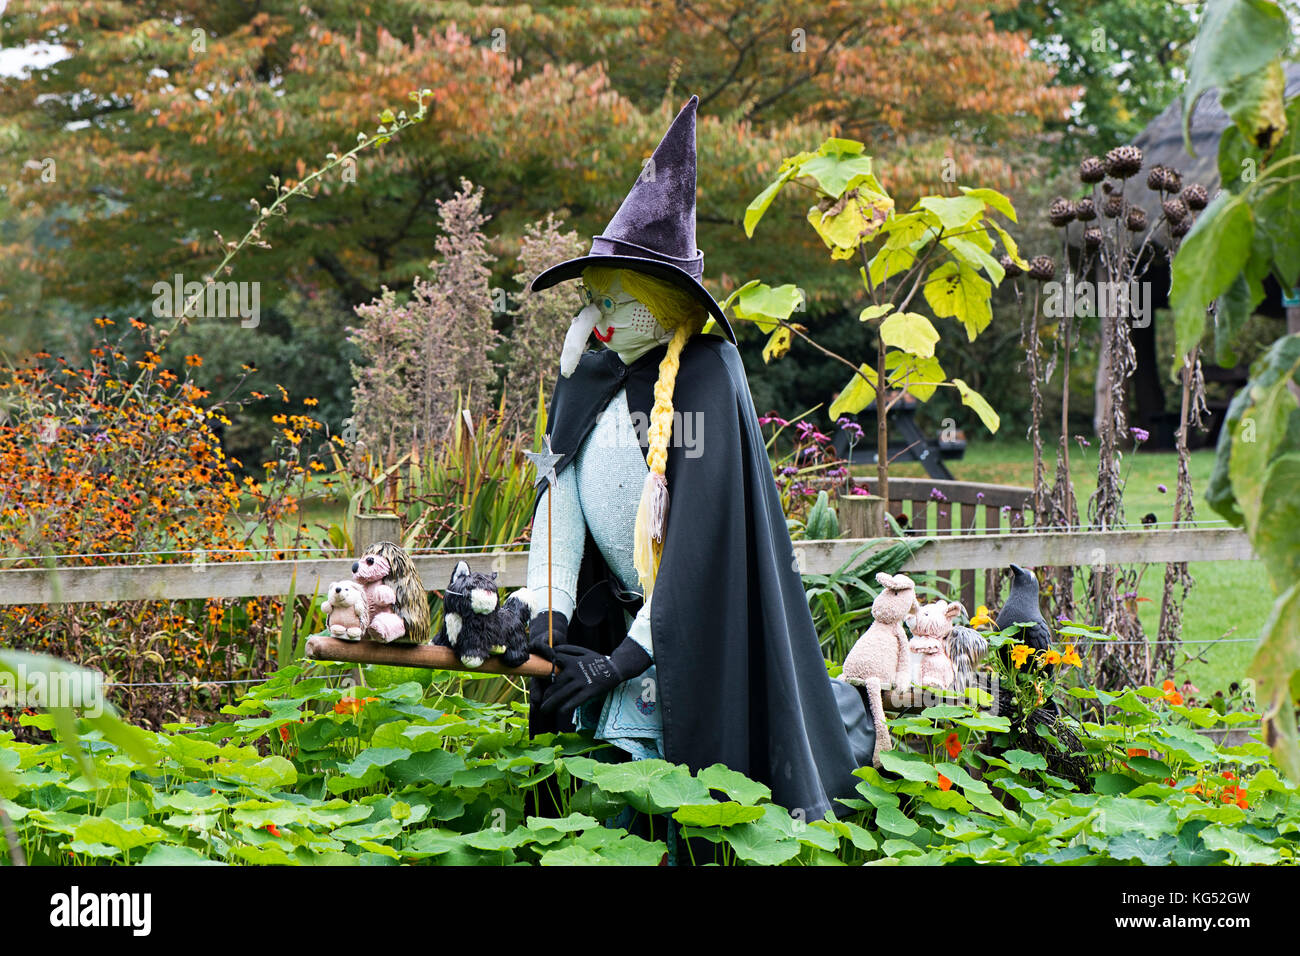 A witch on a broomstick with a black cat, garden display for Halloween. Stock Photo